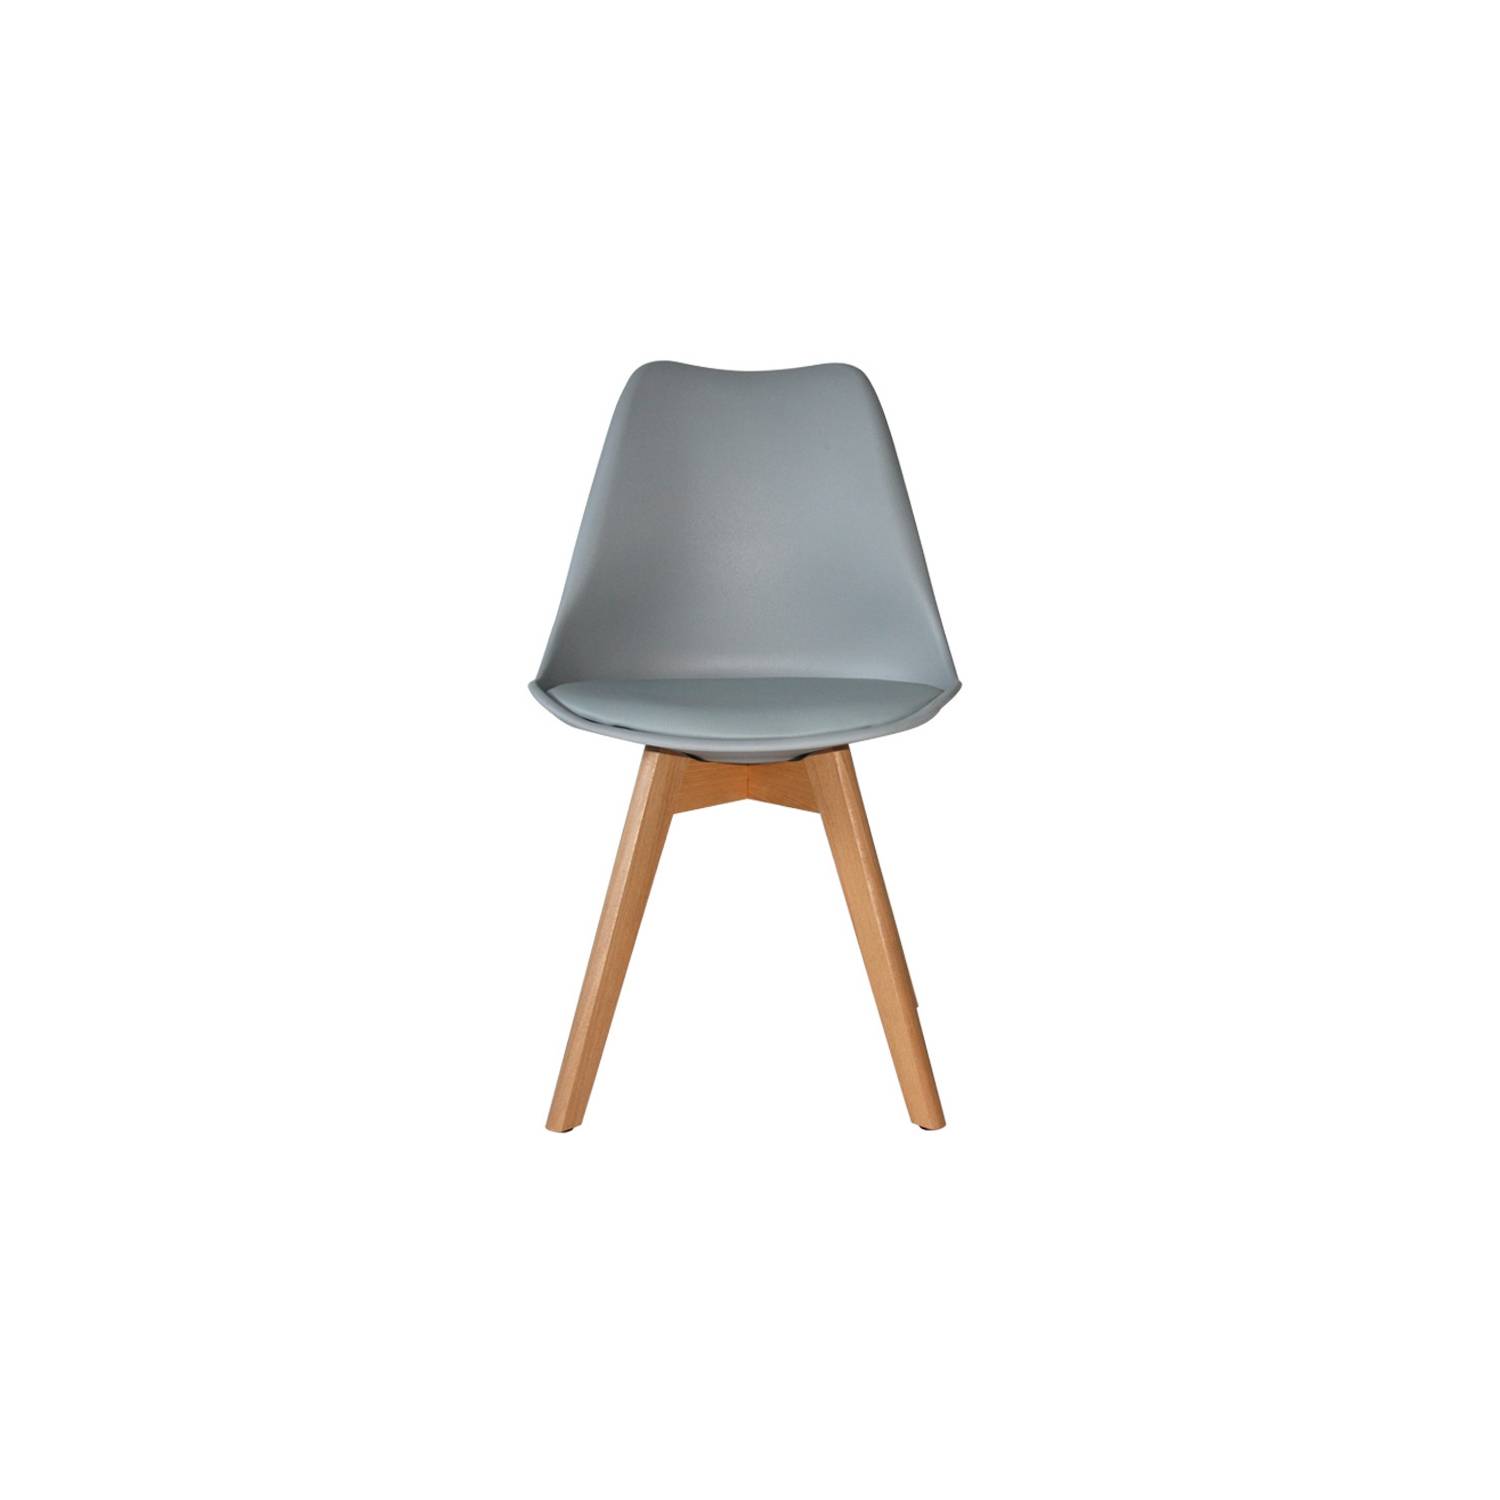 SILLA NEW TOWER WOOD GRIS